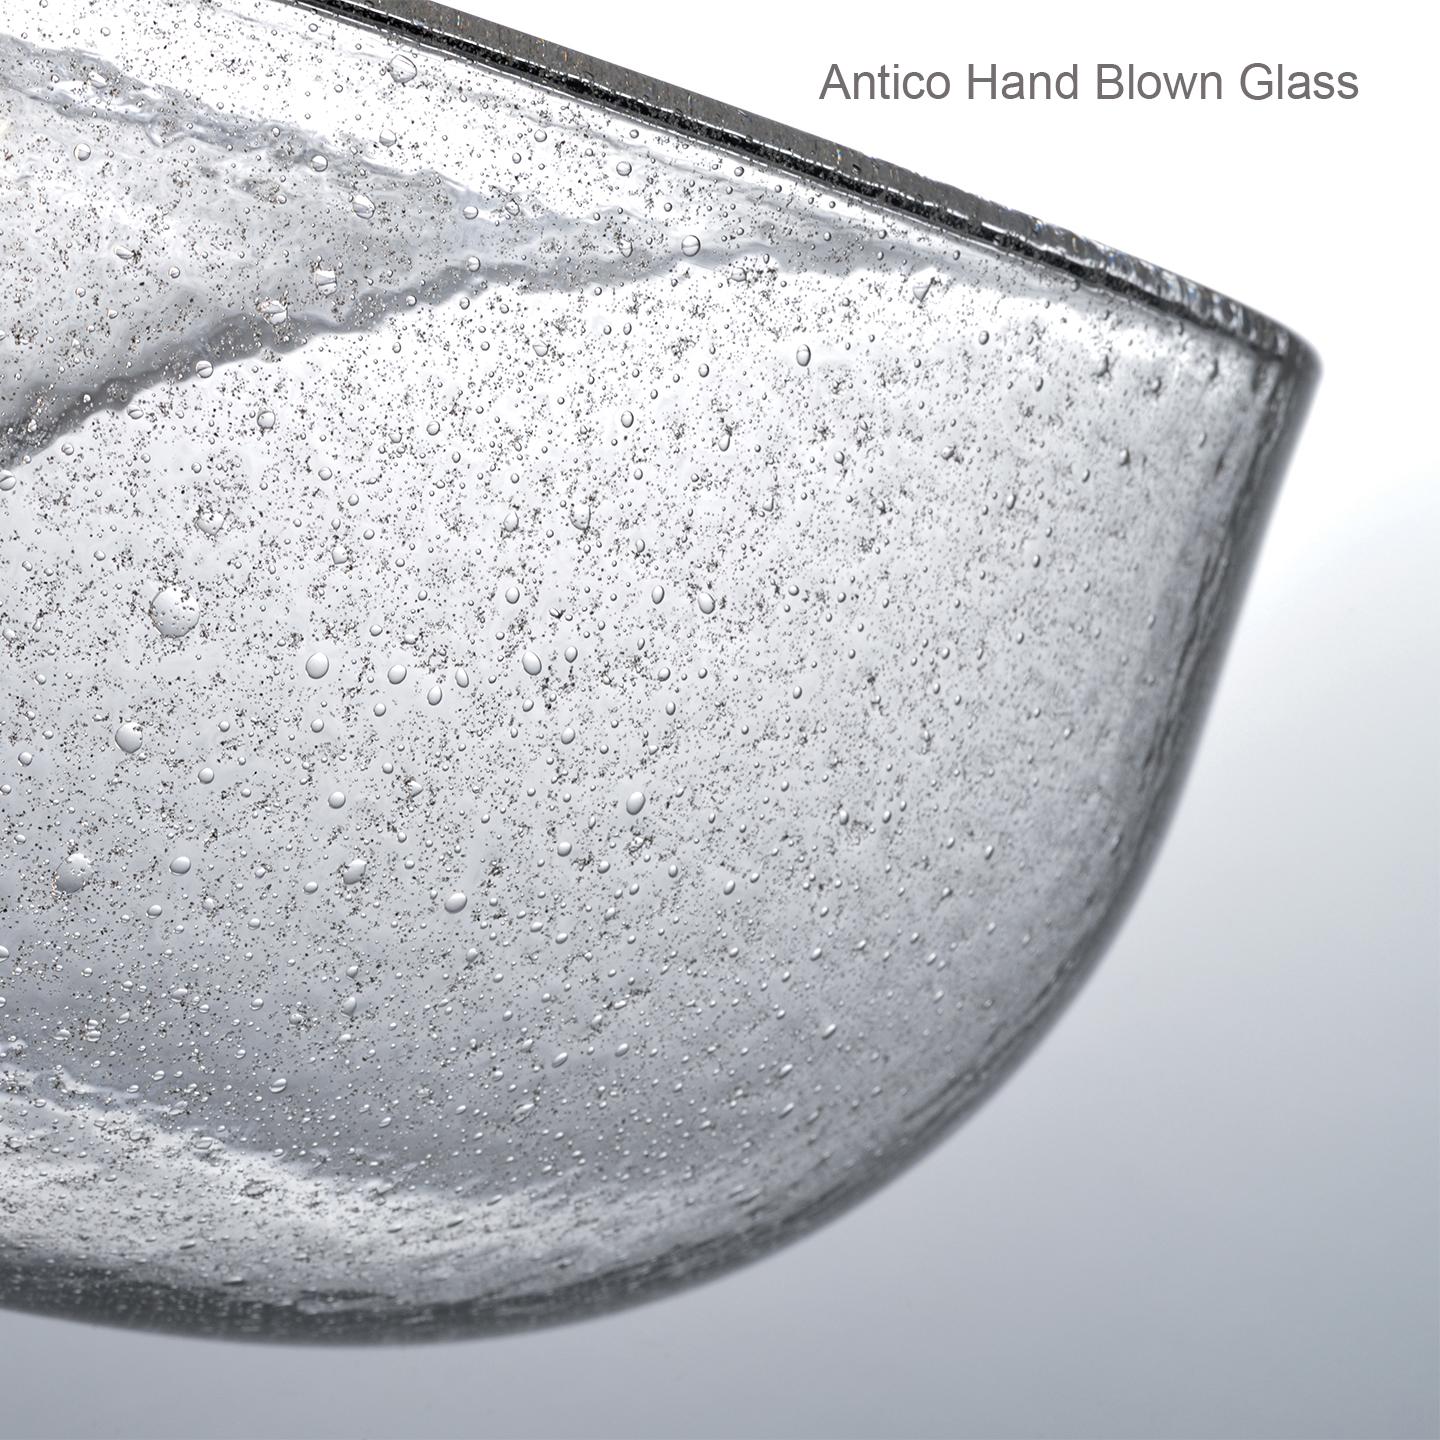 Aella (1968) remains one of the icons of Leucos, representing our vision to bring a fresh, contemporary point of view to traditional hand blown glass techniques. As a Maestro from the Veneto region of Italy hand blows Aella, they create a stunning